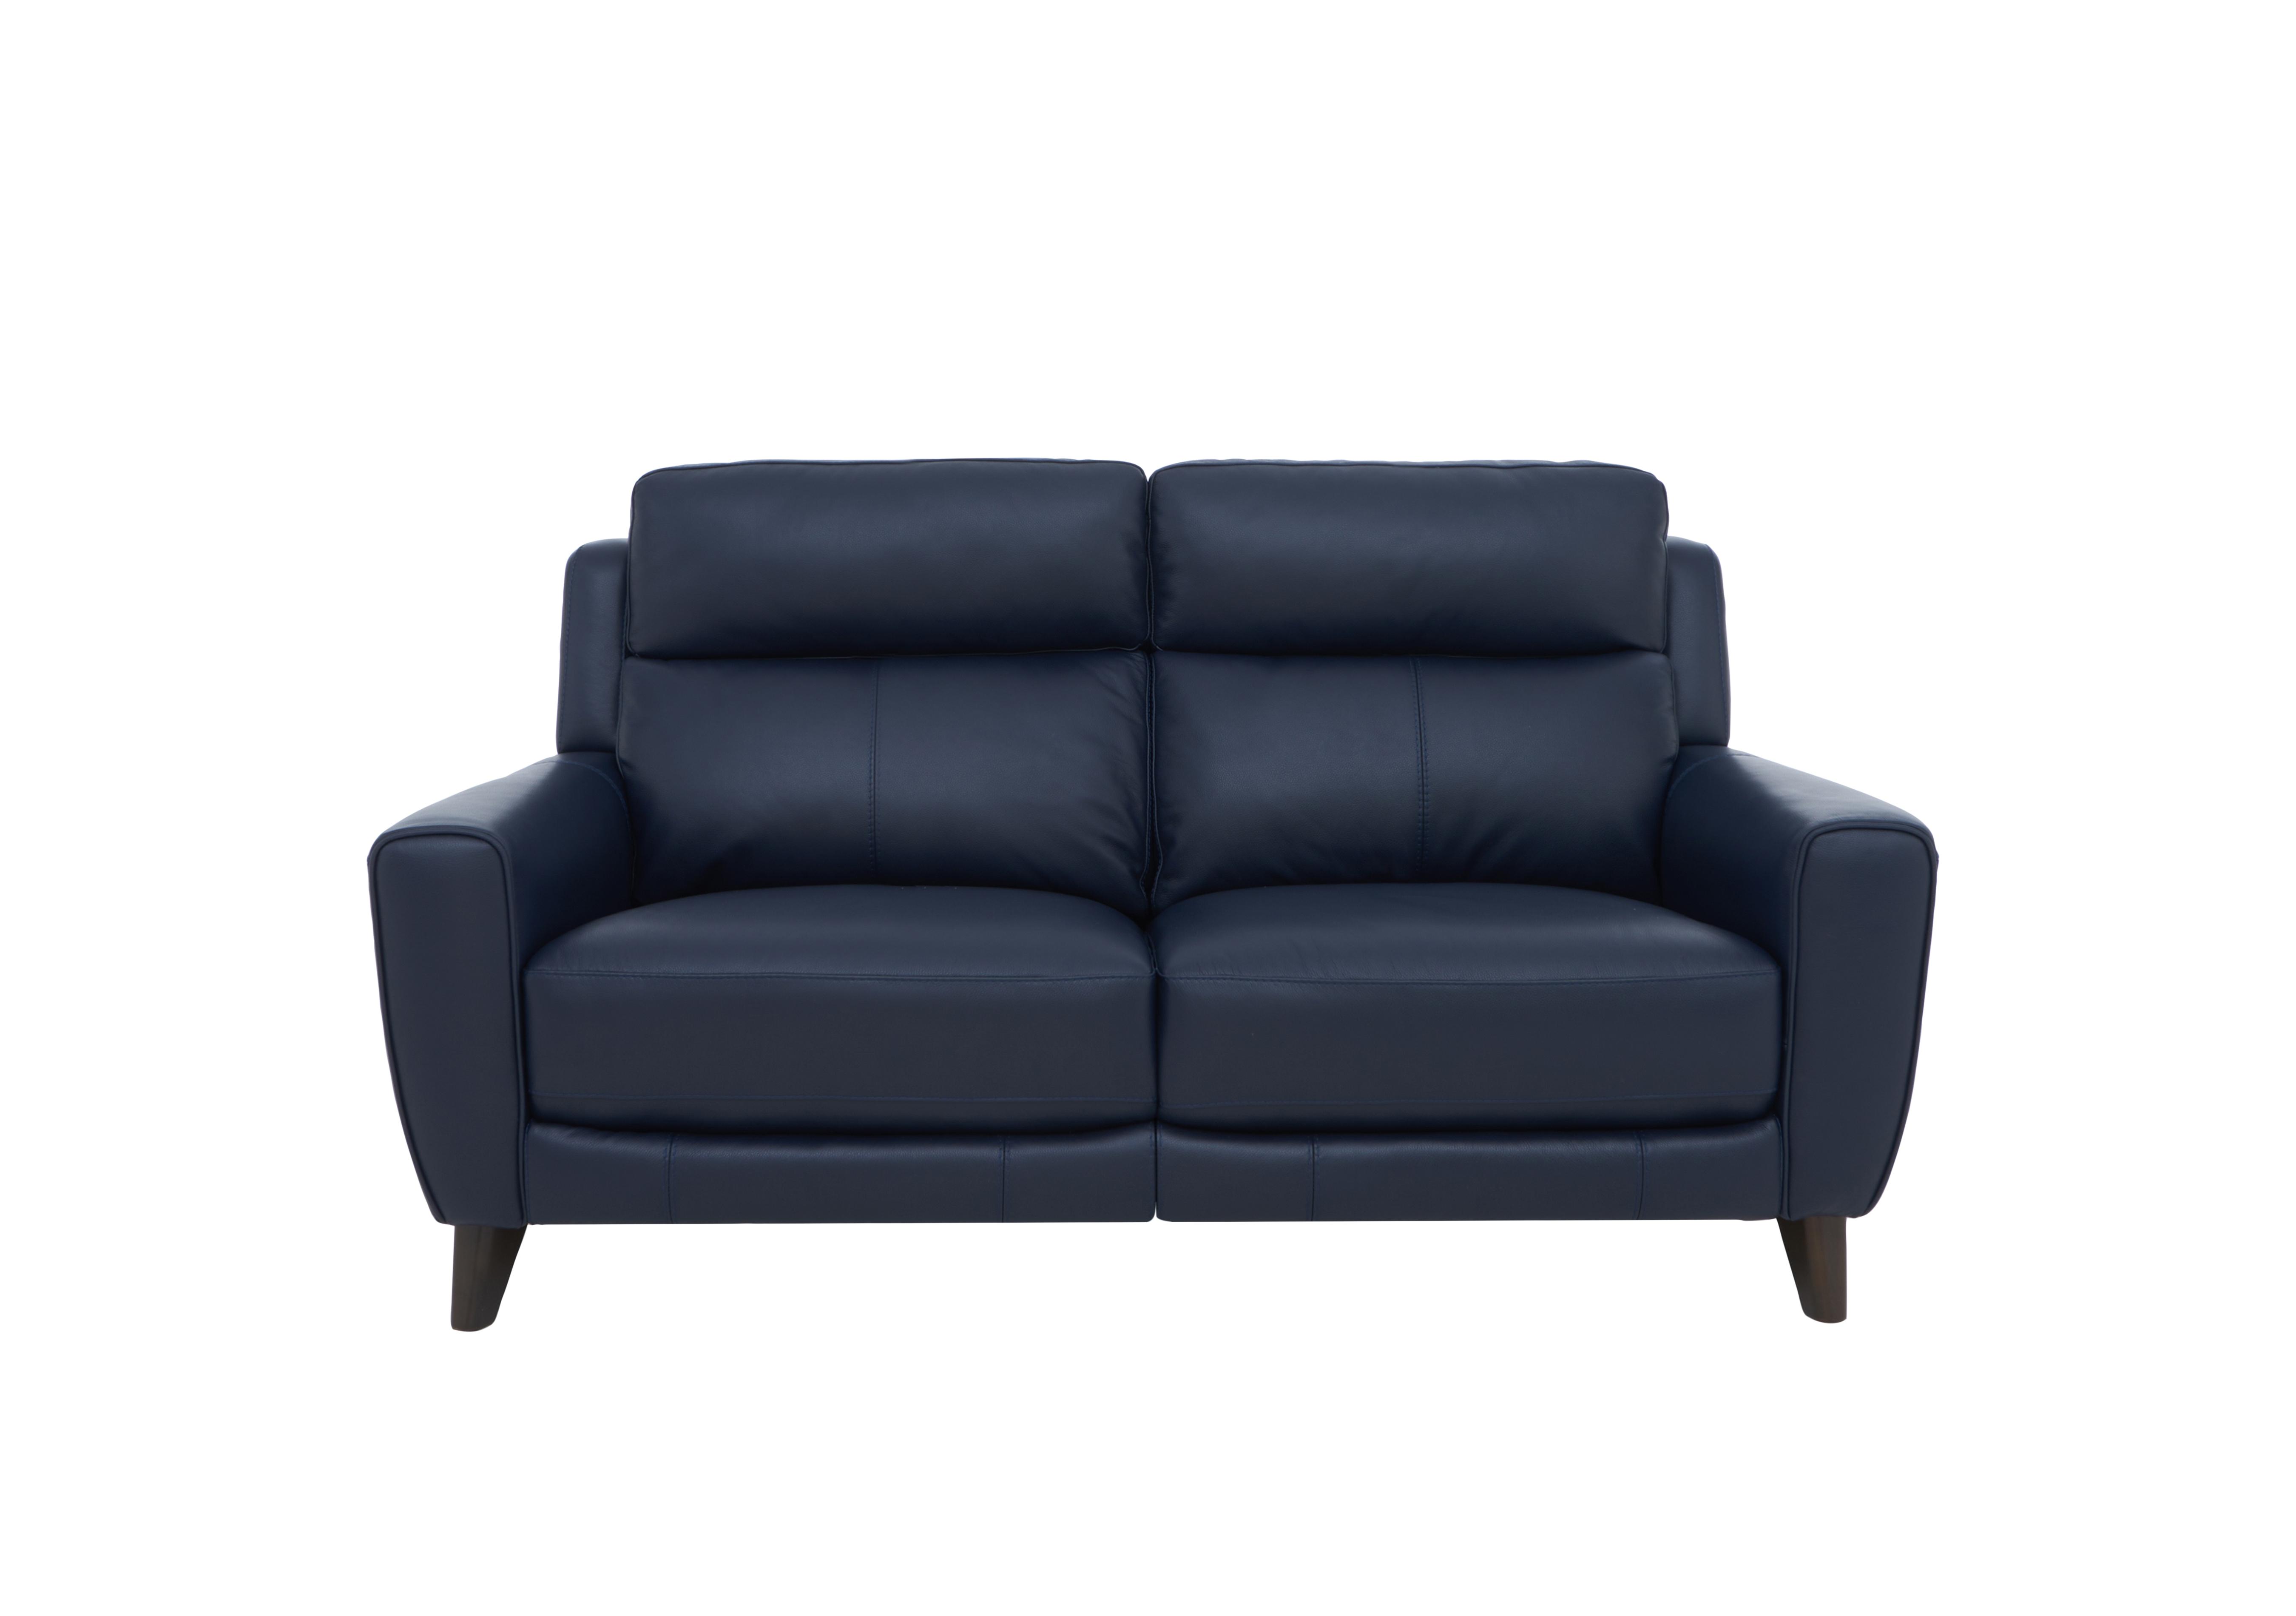 Zen 2 Seater Leather Power Recliner Sofa with Power Headrests in Bx-036c Navy on Furniture Village